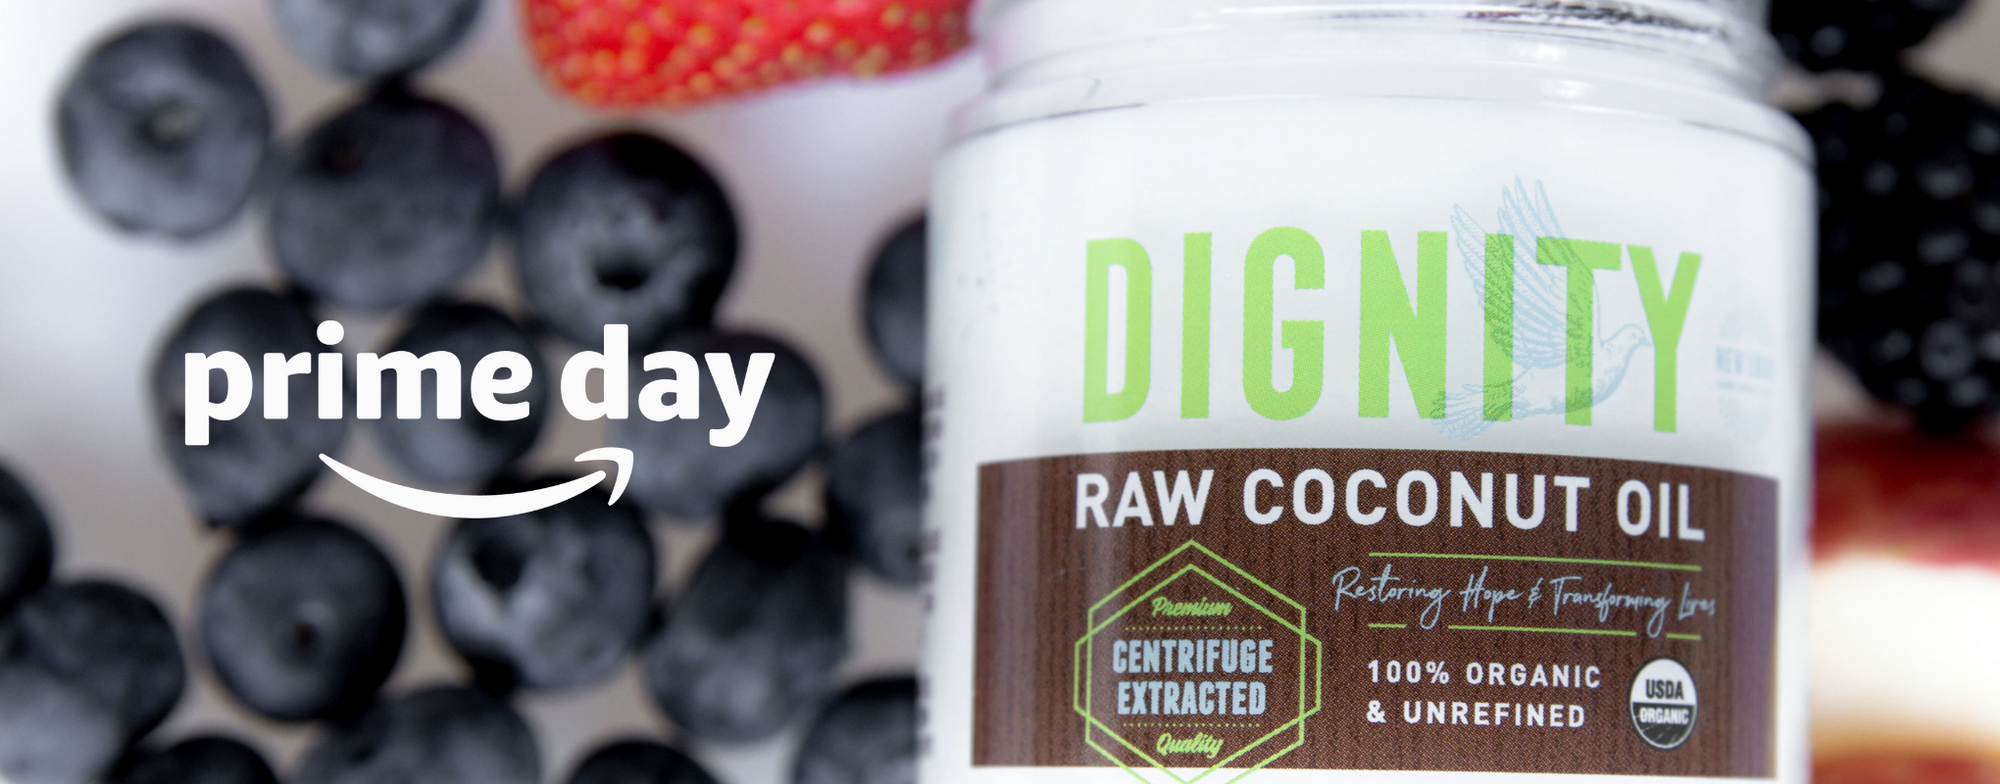 New Brand Joins Amazon Prime Day: Dignity Coconuts